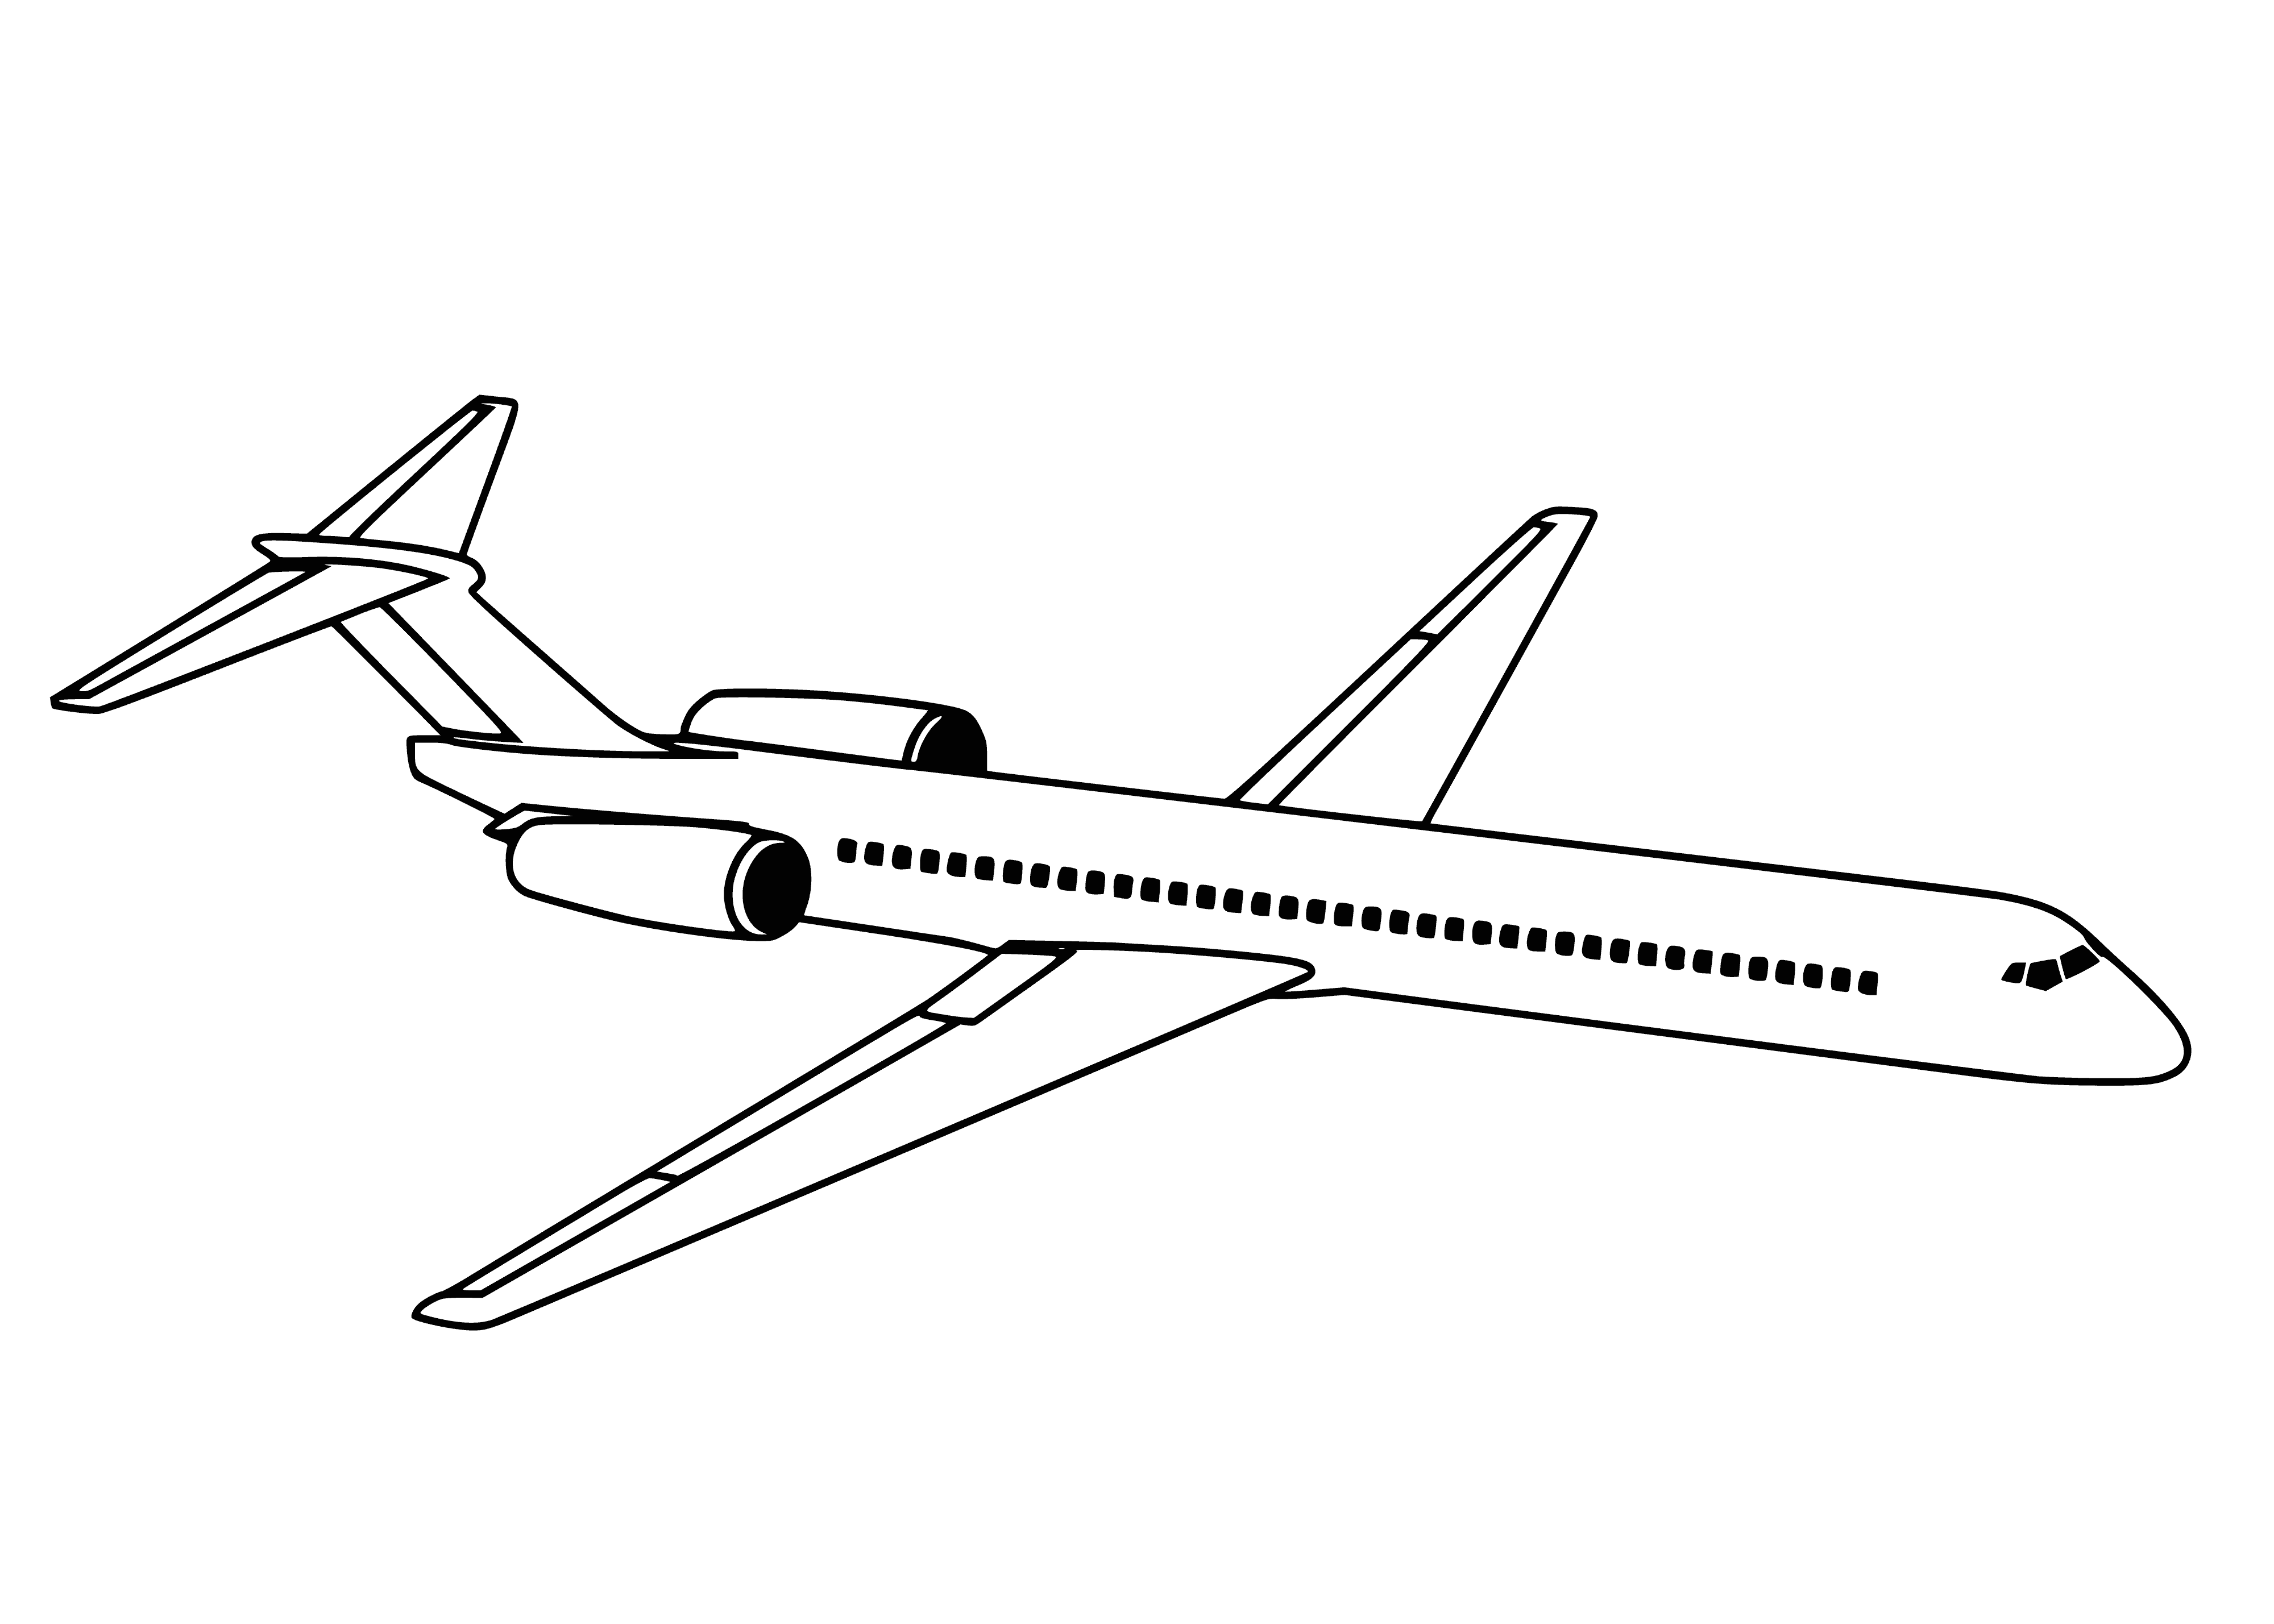 coloring page: Large aircraft used to transport cargo/passengers over long distances. Pressurized cabins and multiple engines.